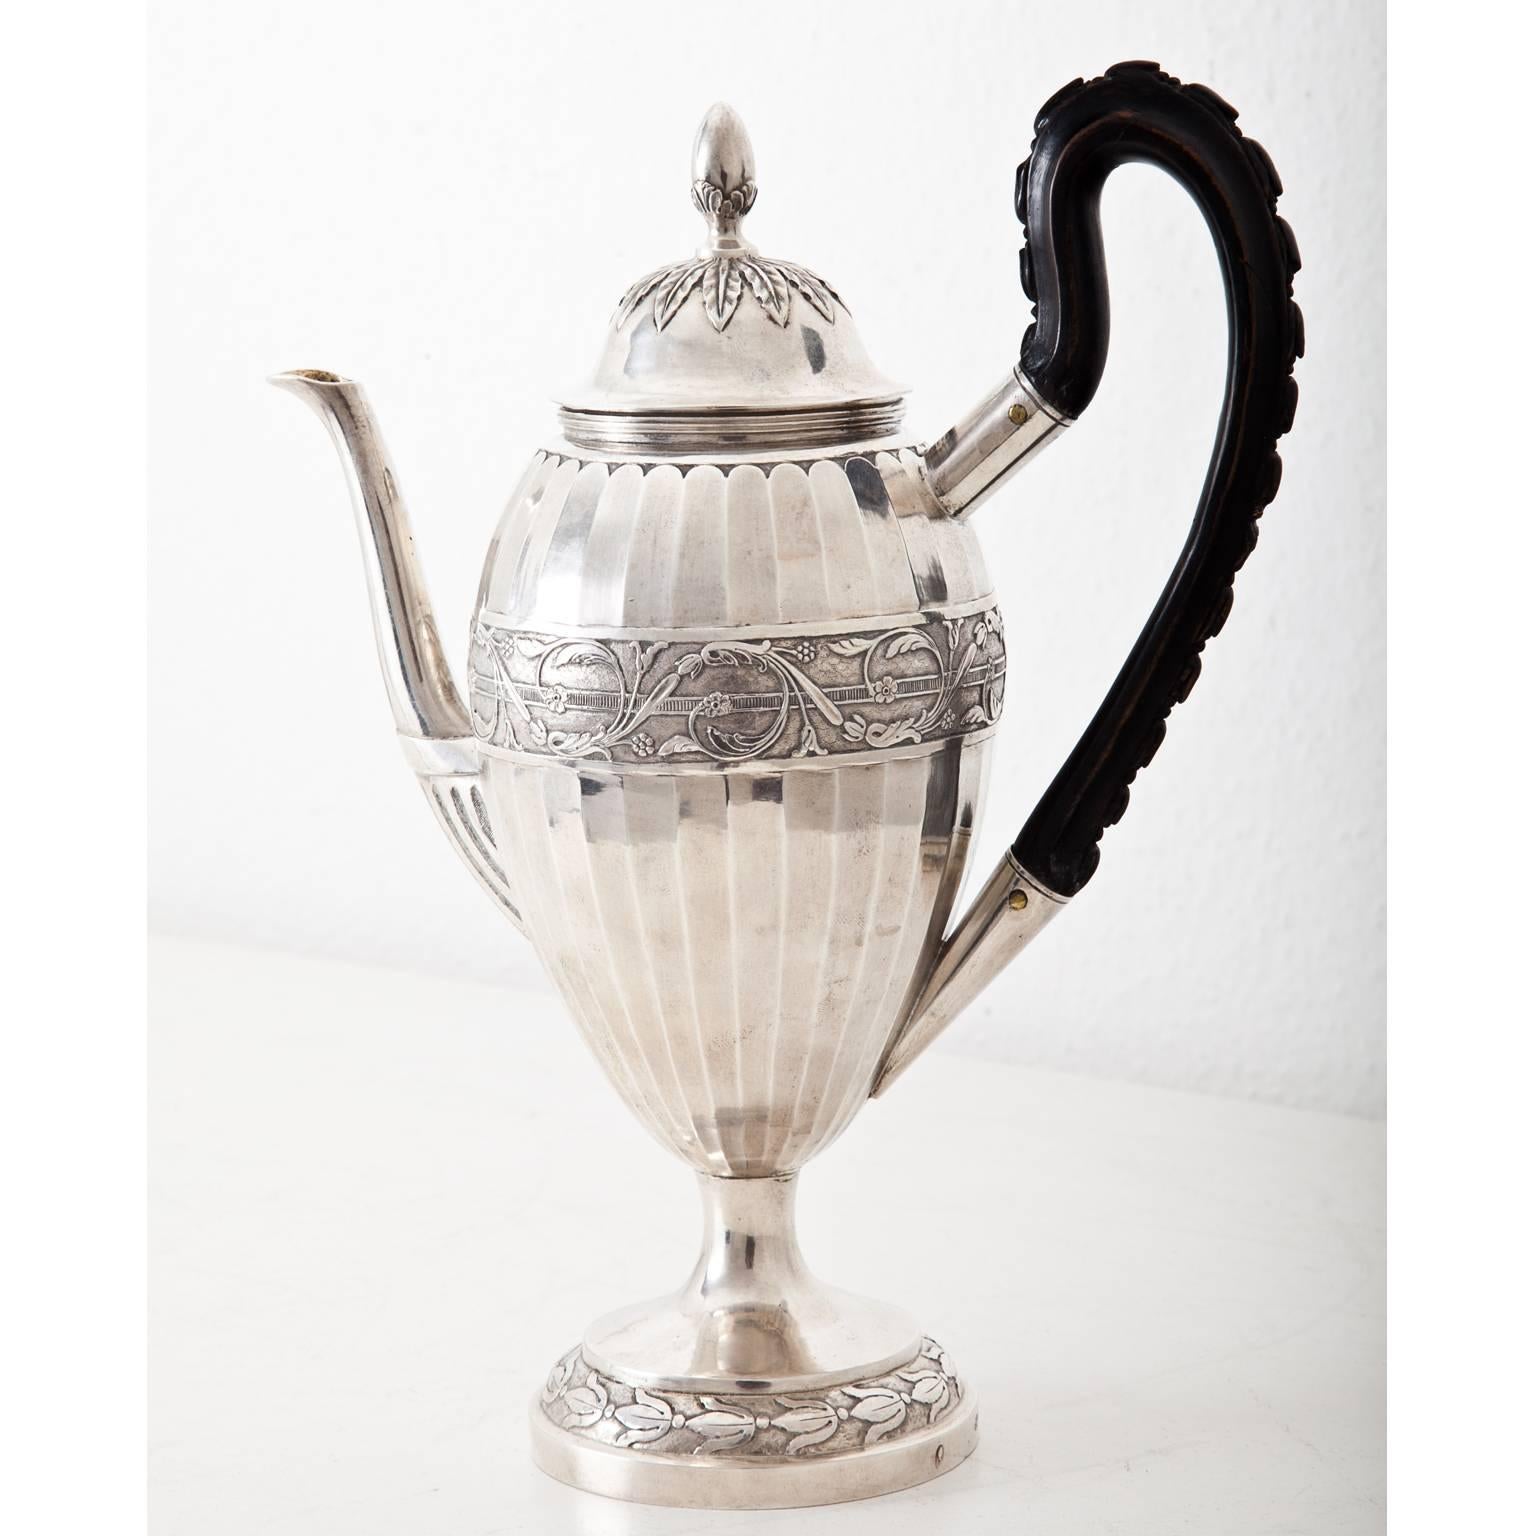 Neoclassical Coffee Pot, Augsburg, 1807-1809 In Excellent Condition For Sale In Greding, DE